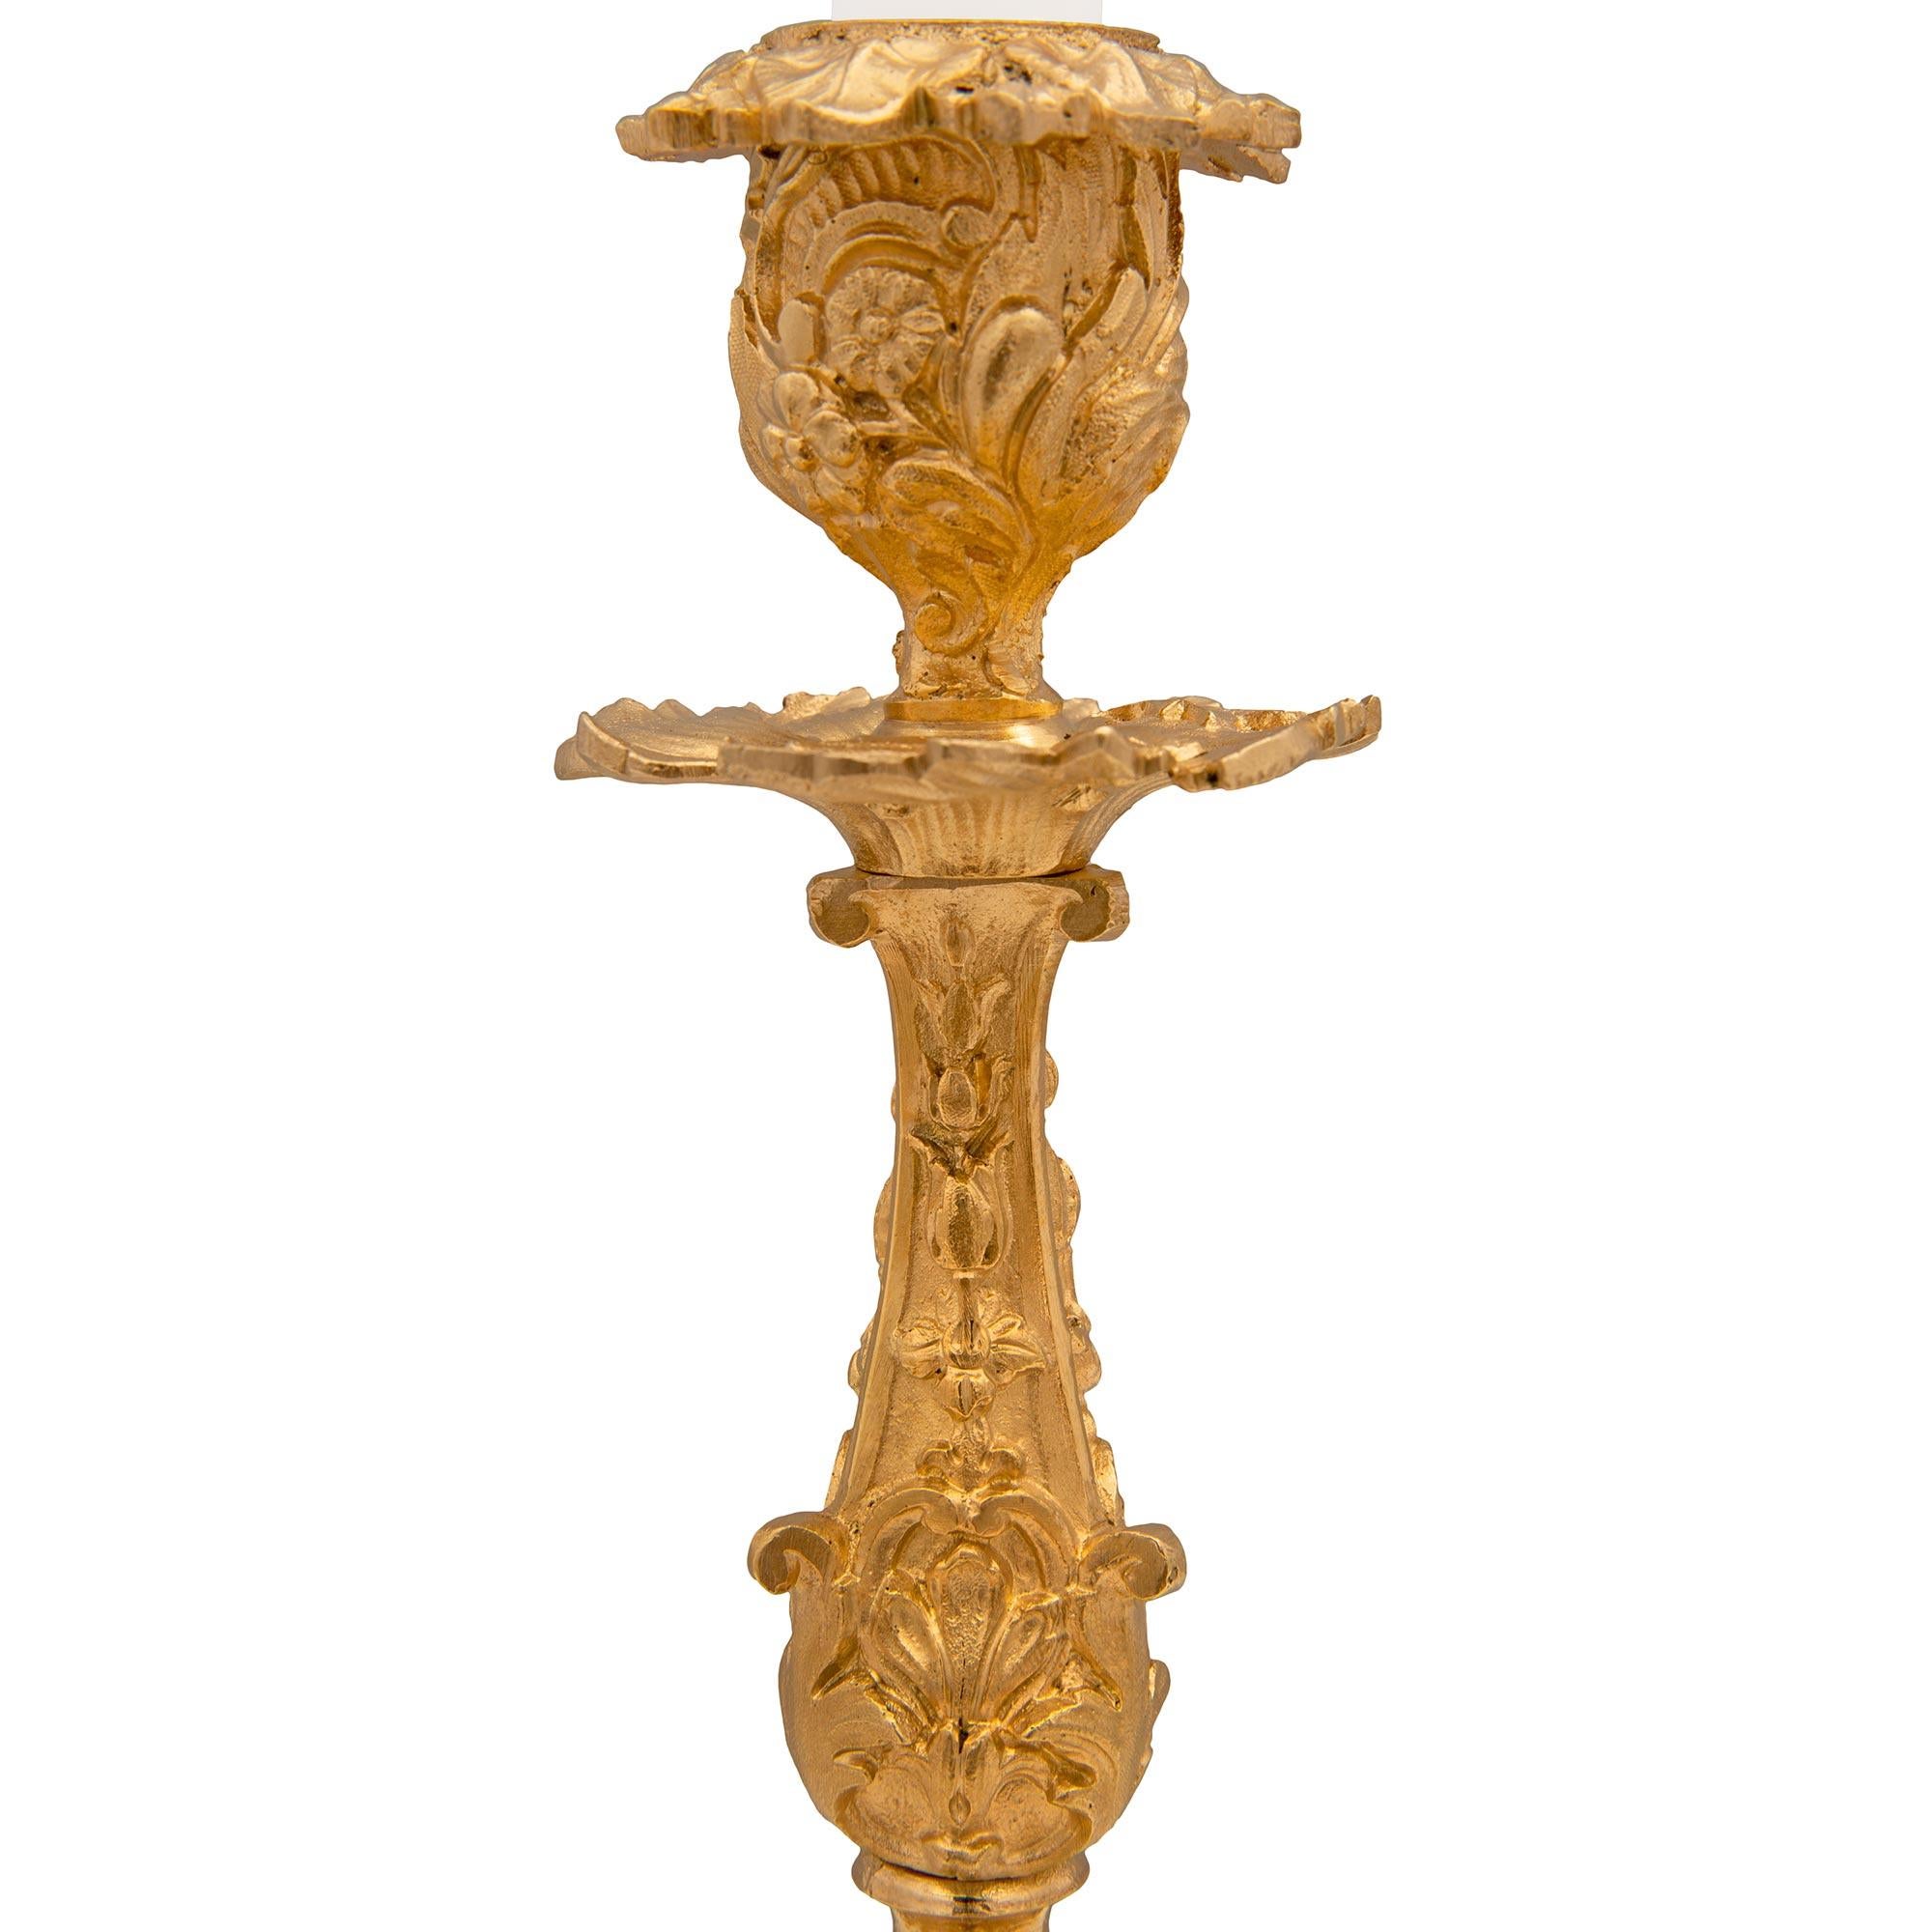 antique french candlesticks